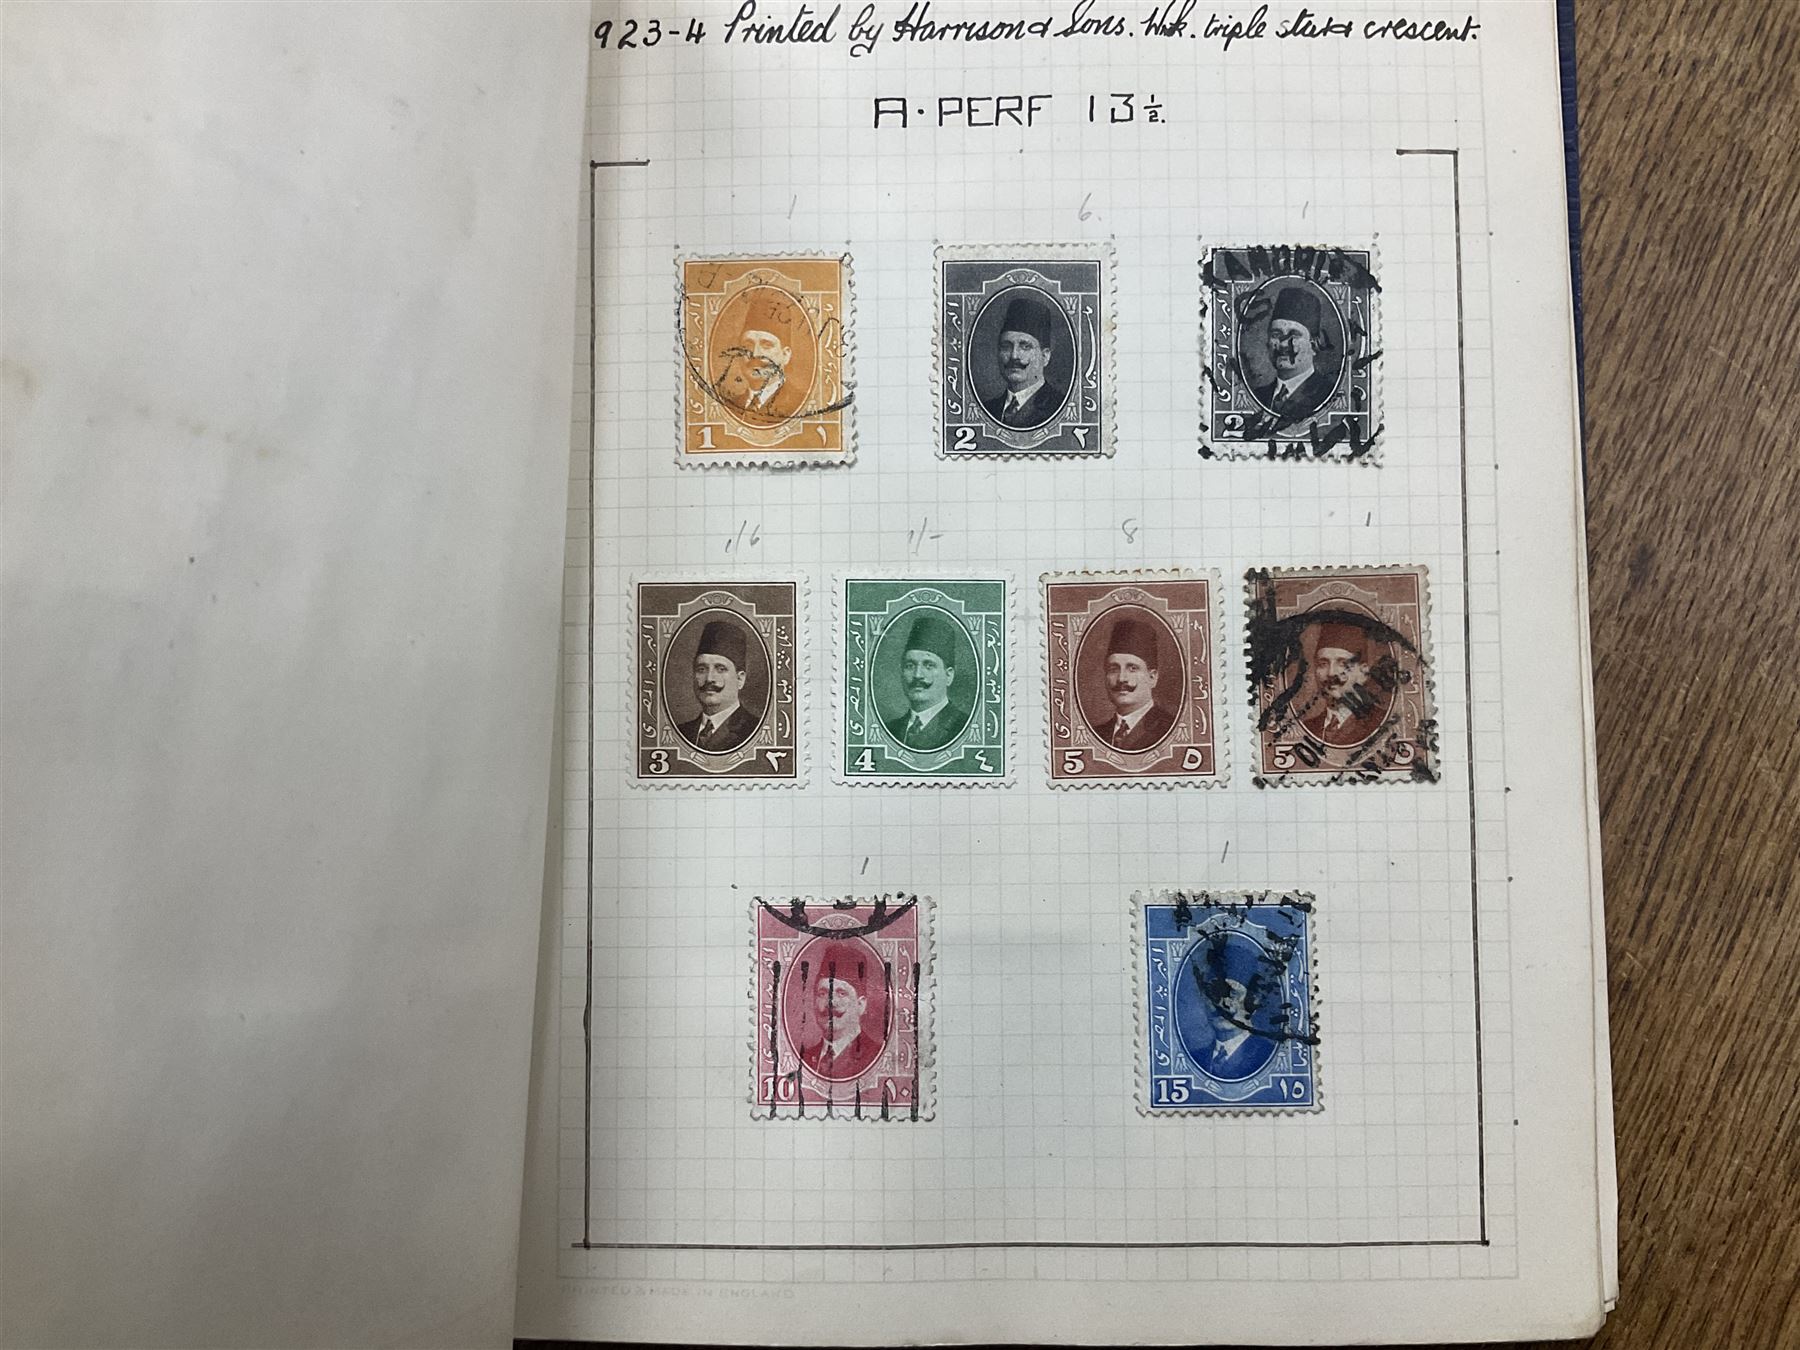 Egypt 1866 and later stamps - Image 161 of 761